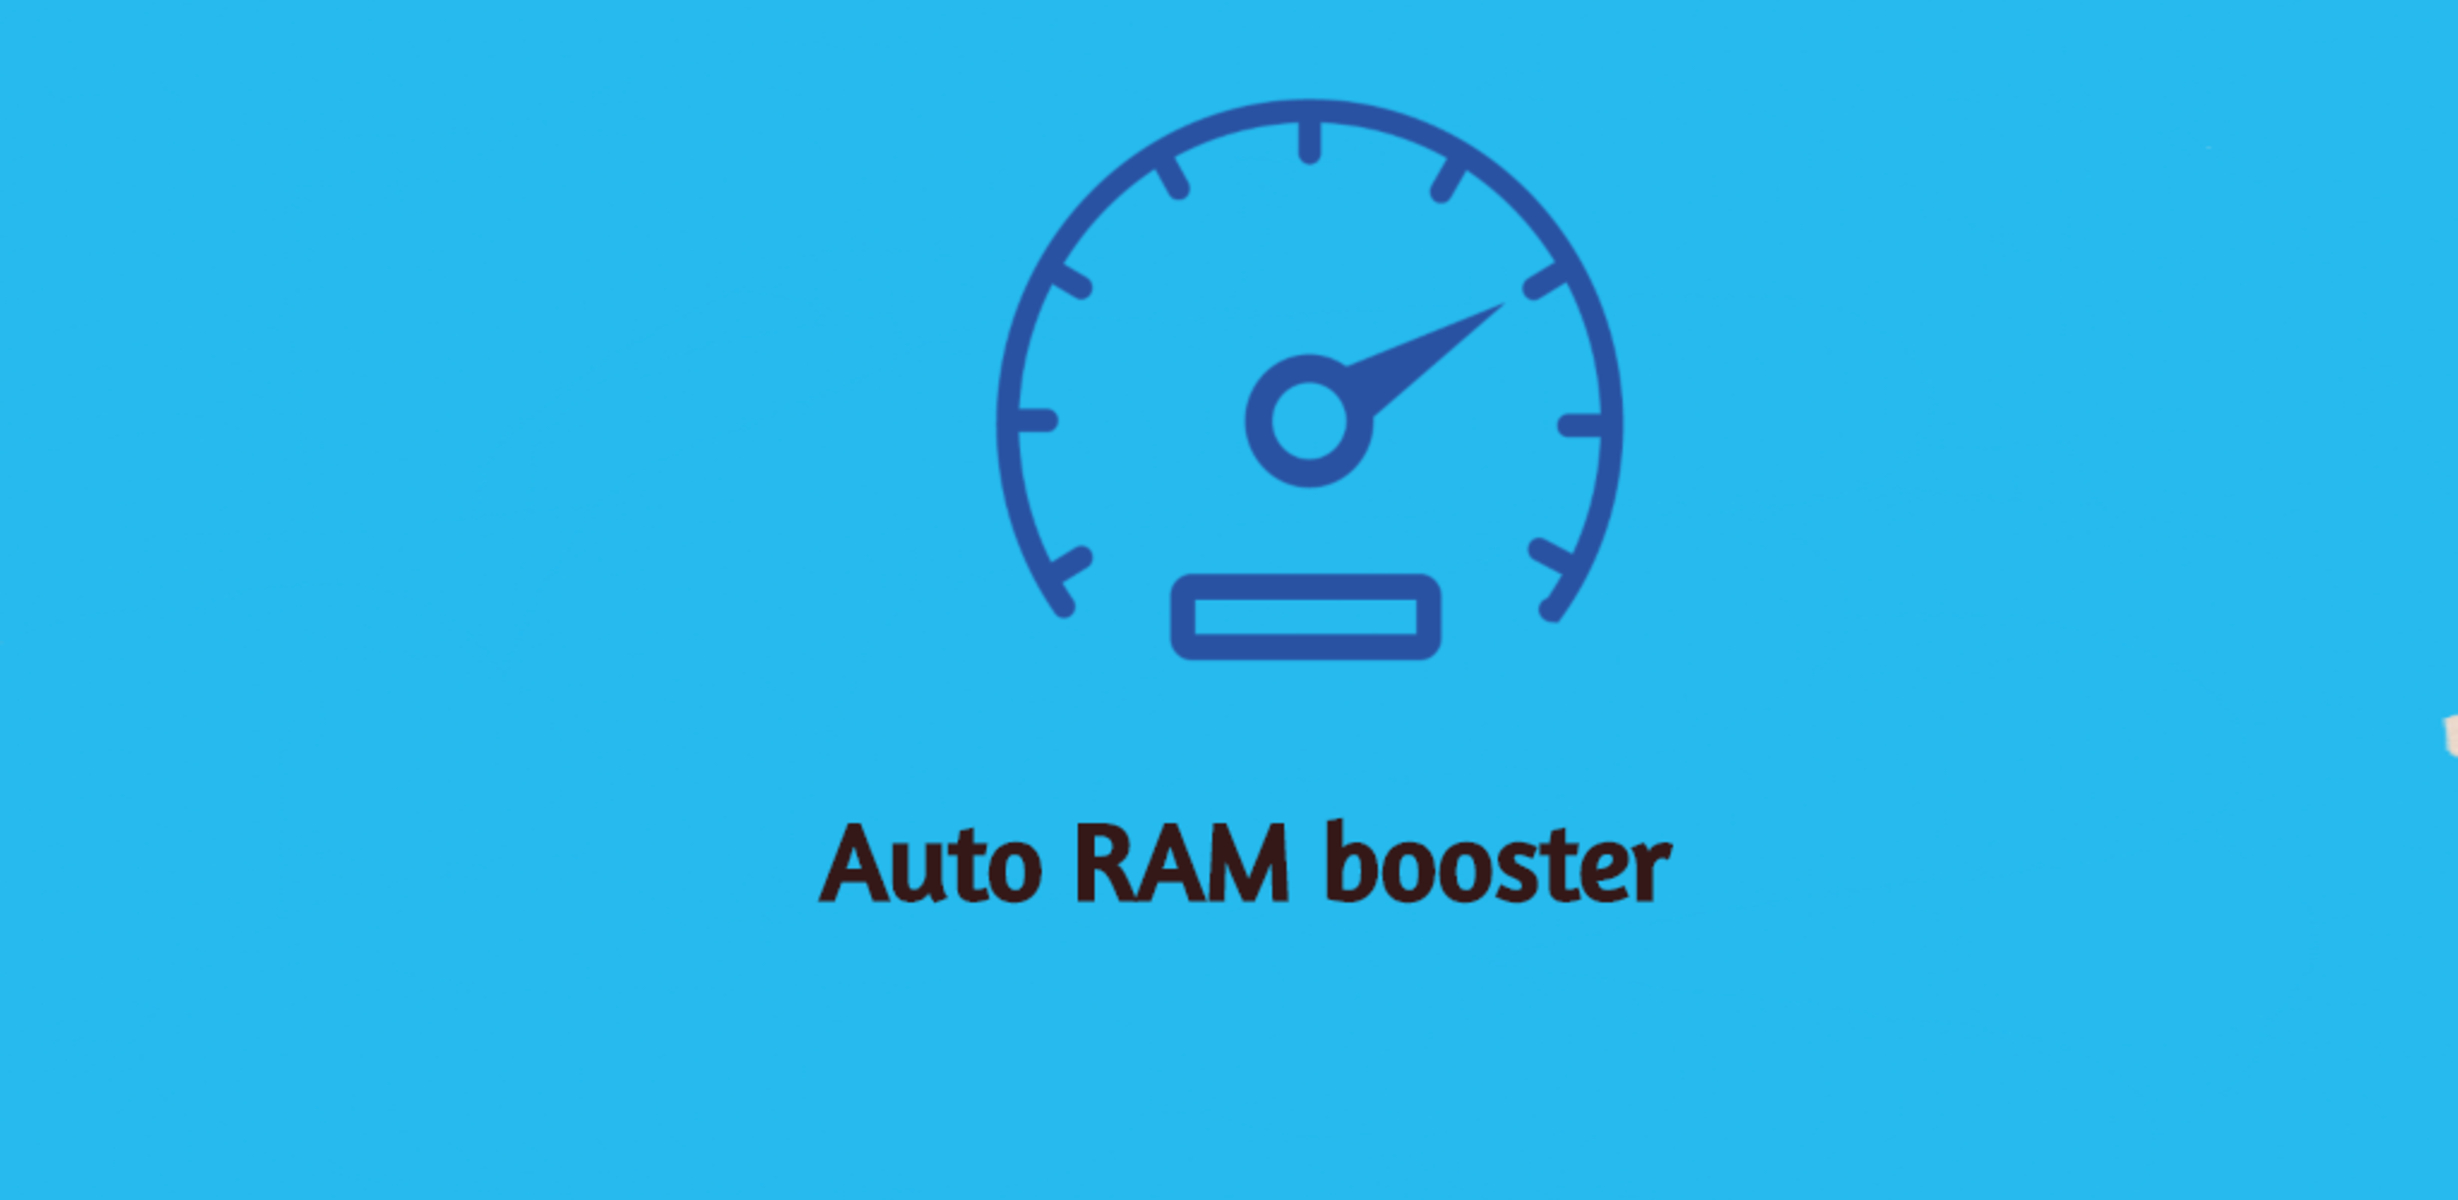 What Is Auto RAM Boost?